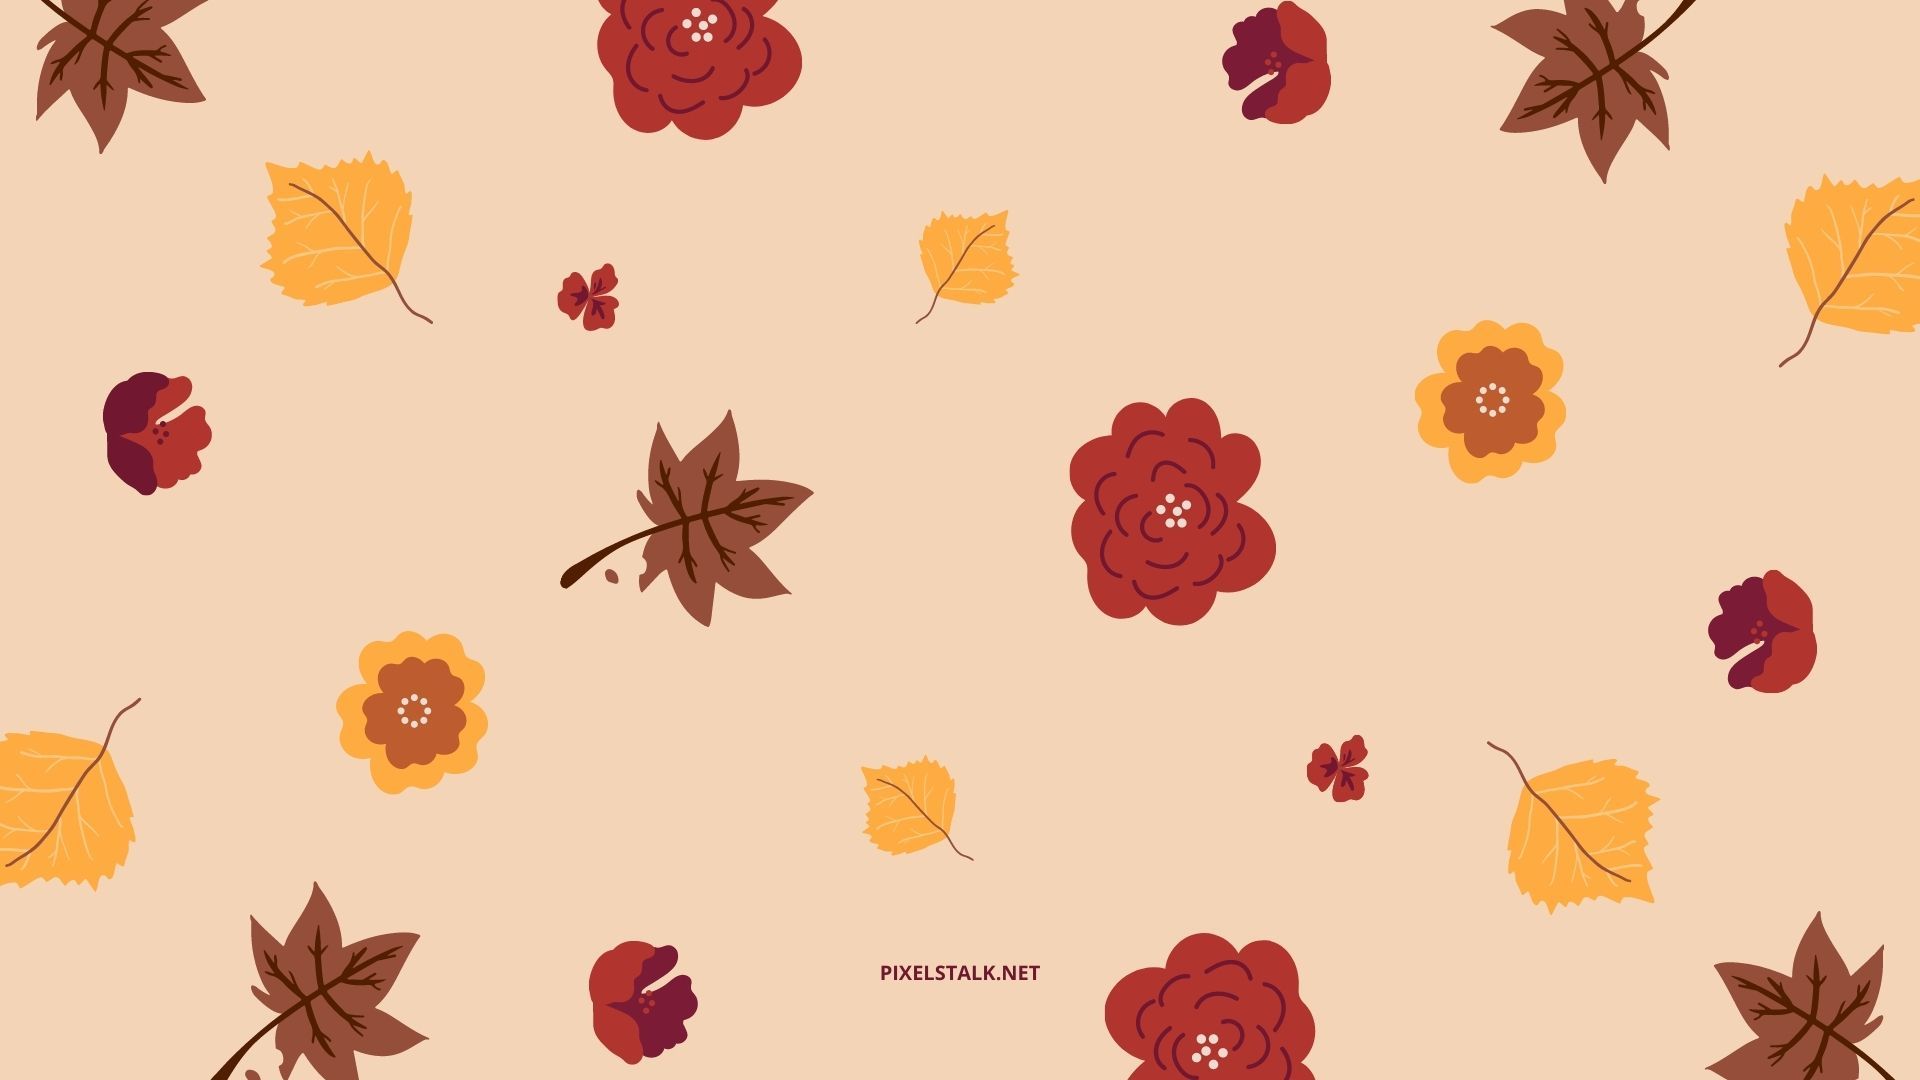 A pattern of flowers and leaves on beige background - Desktop